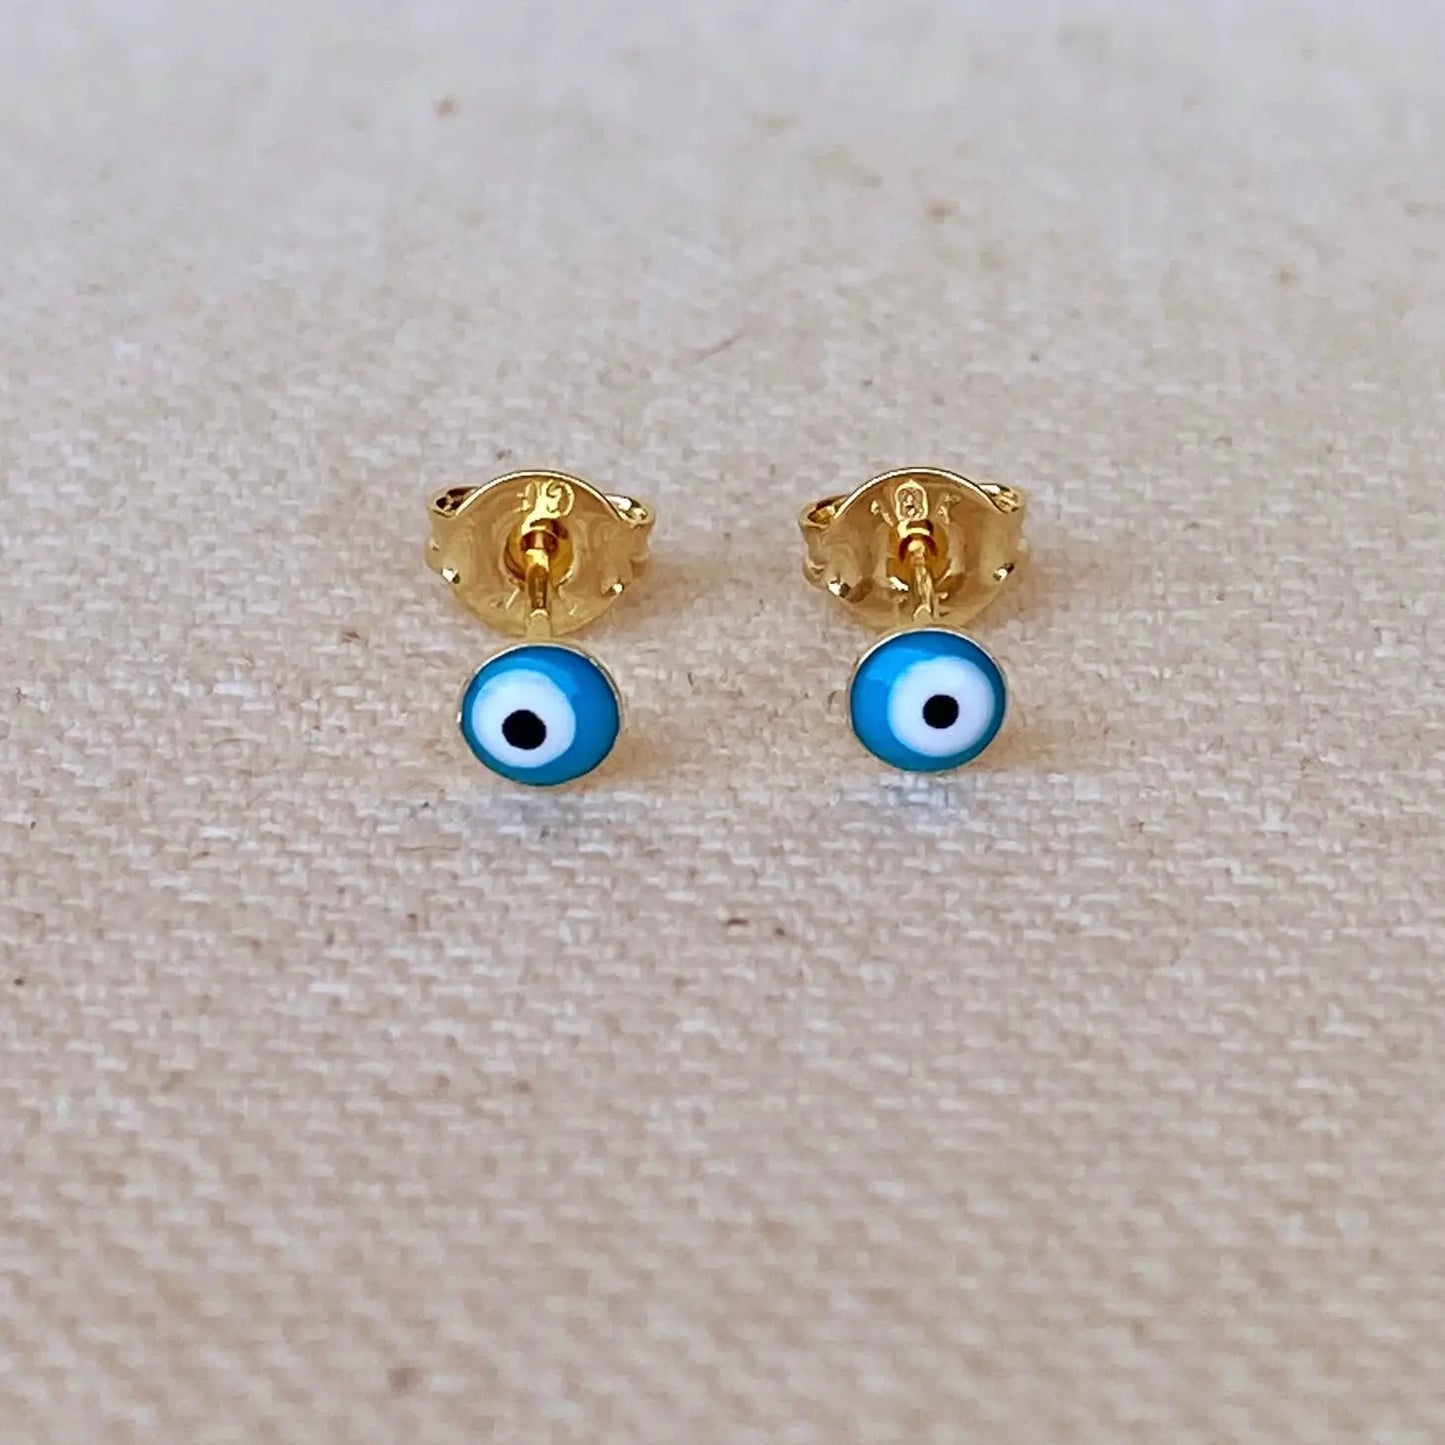 Protect Your Peace Evil Eye Stud Earrings - 18k Gold Filled